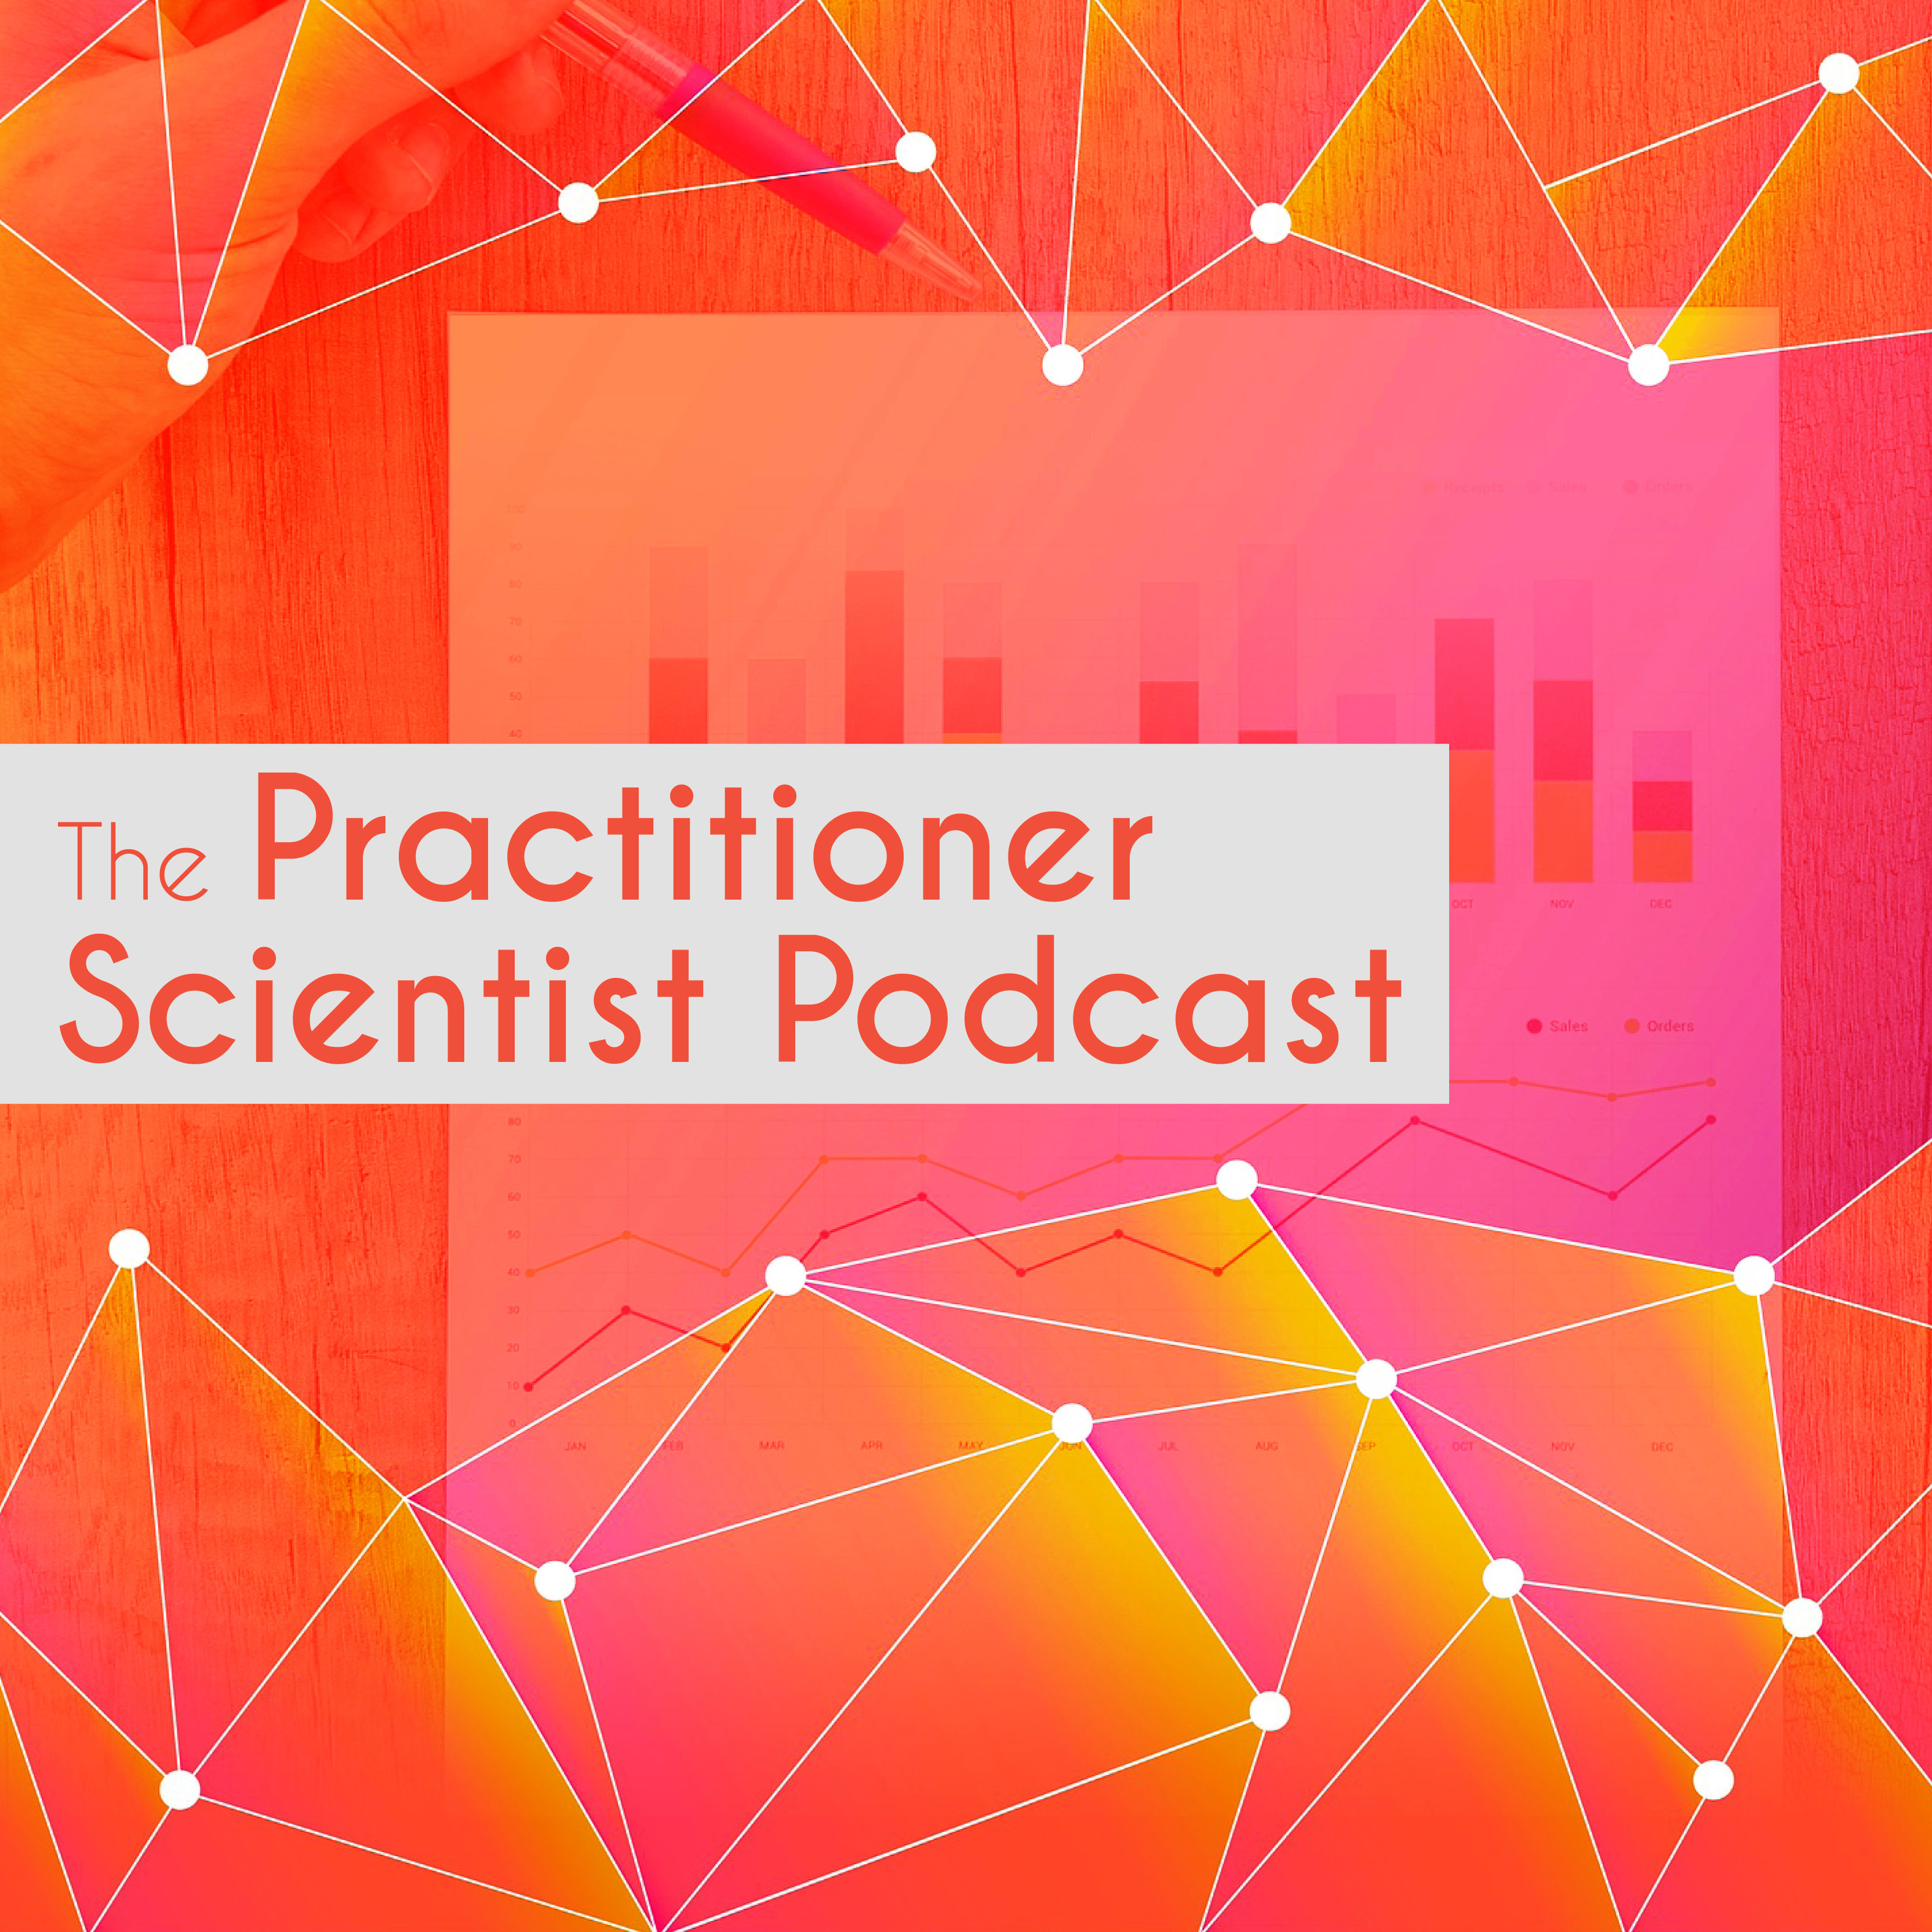 orange geometric shapes background with graph and podcast name